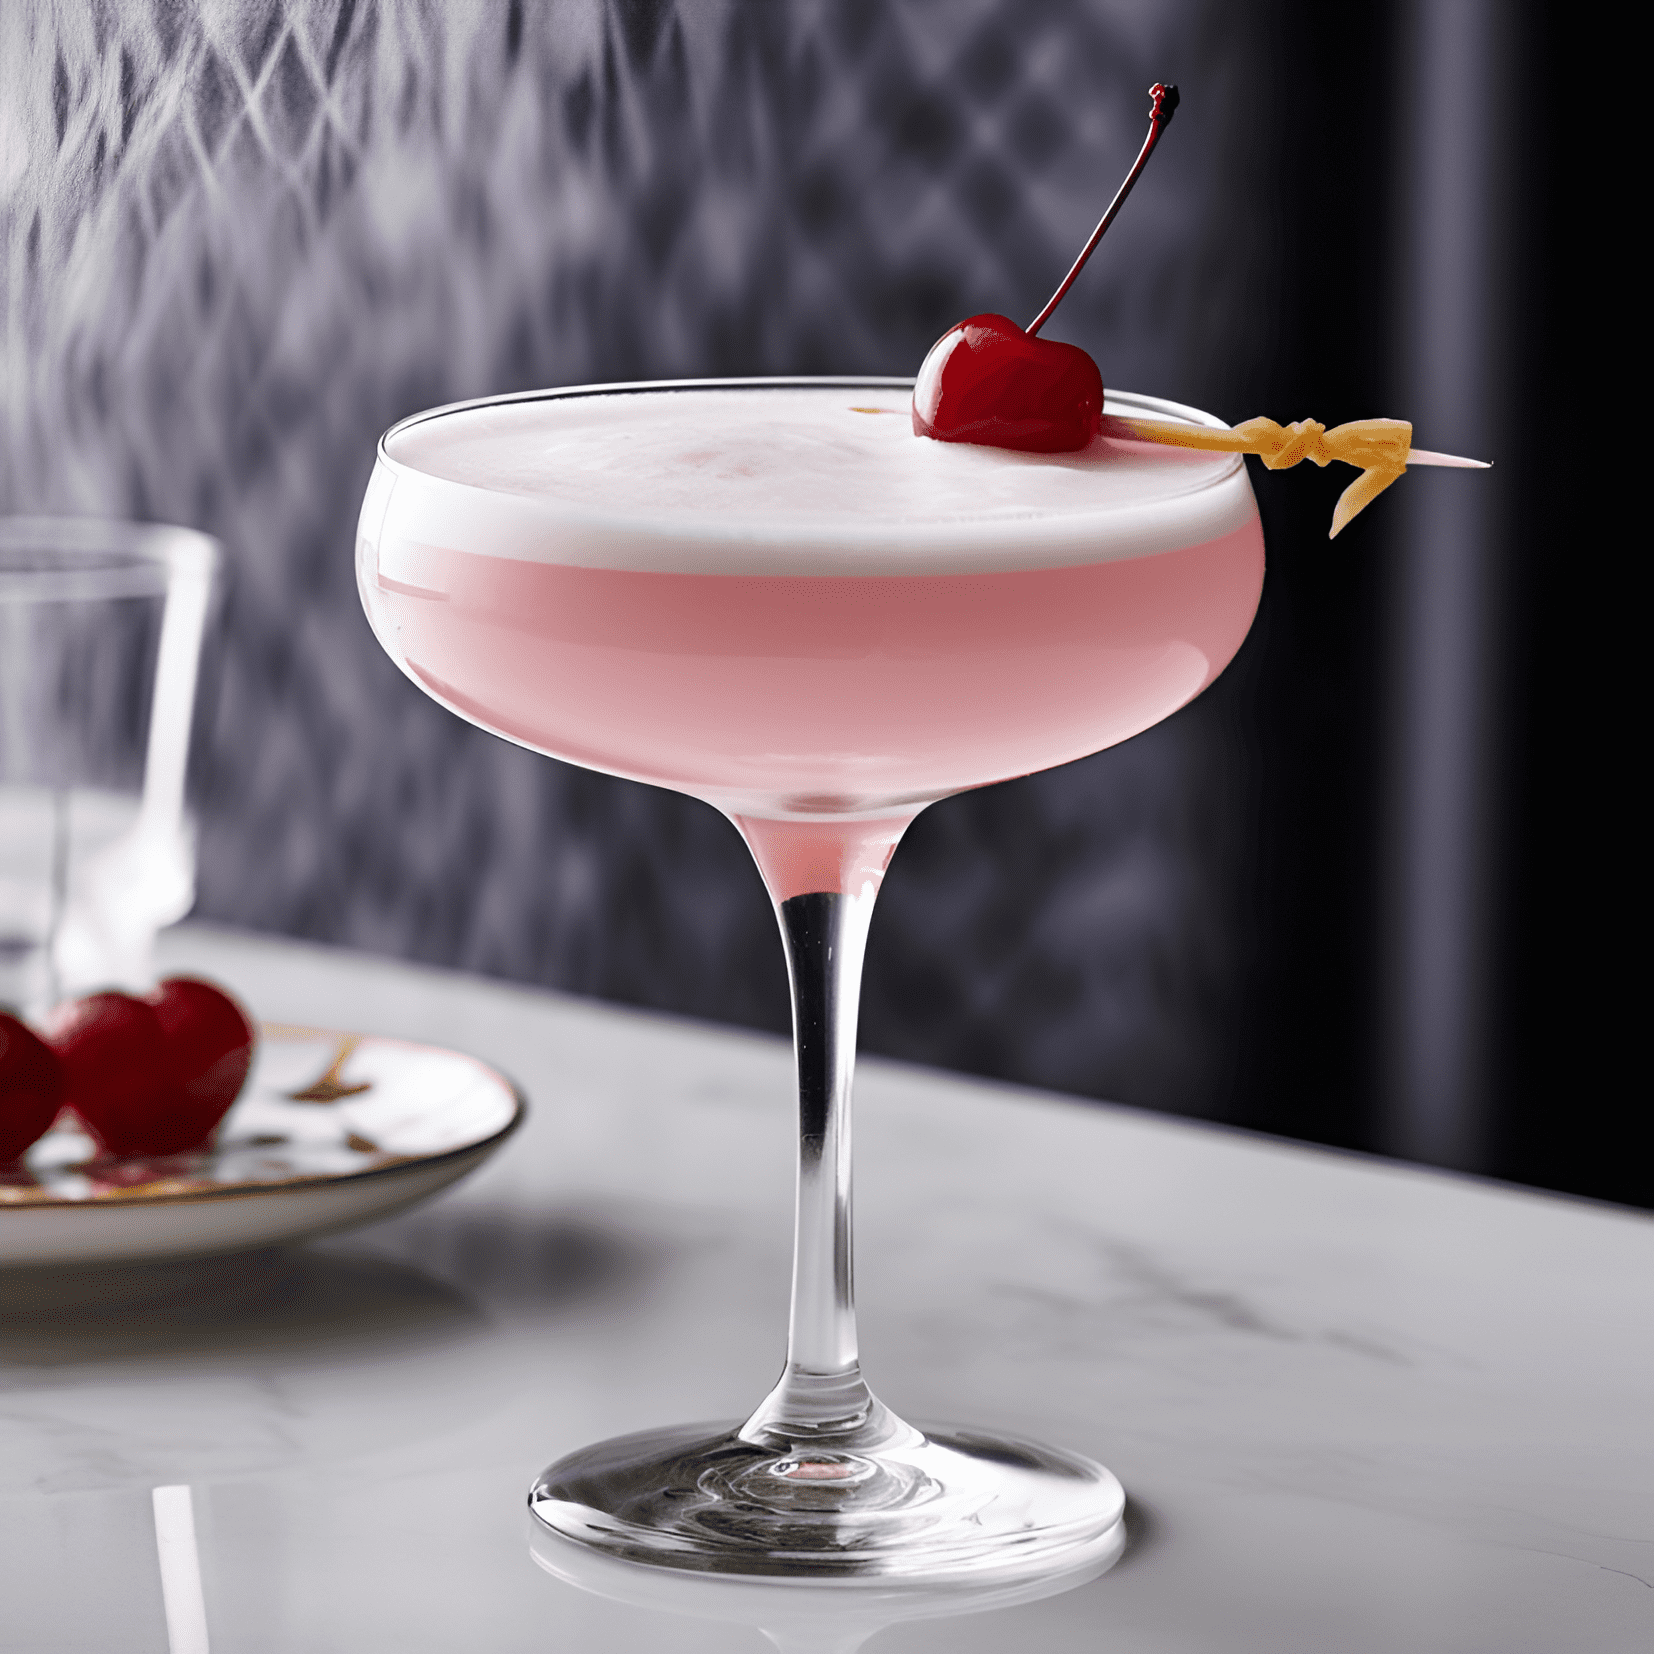 Pink Squirrel Cocktail Recipe - The Pink Squirrel has a sweet, creamy, and nutty flavor profile. It is rich and indulgent, with a velvety texture and a hint of fruity notes from the crème de noyaux.